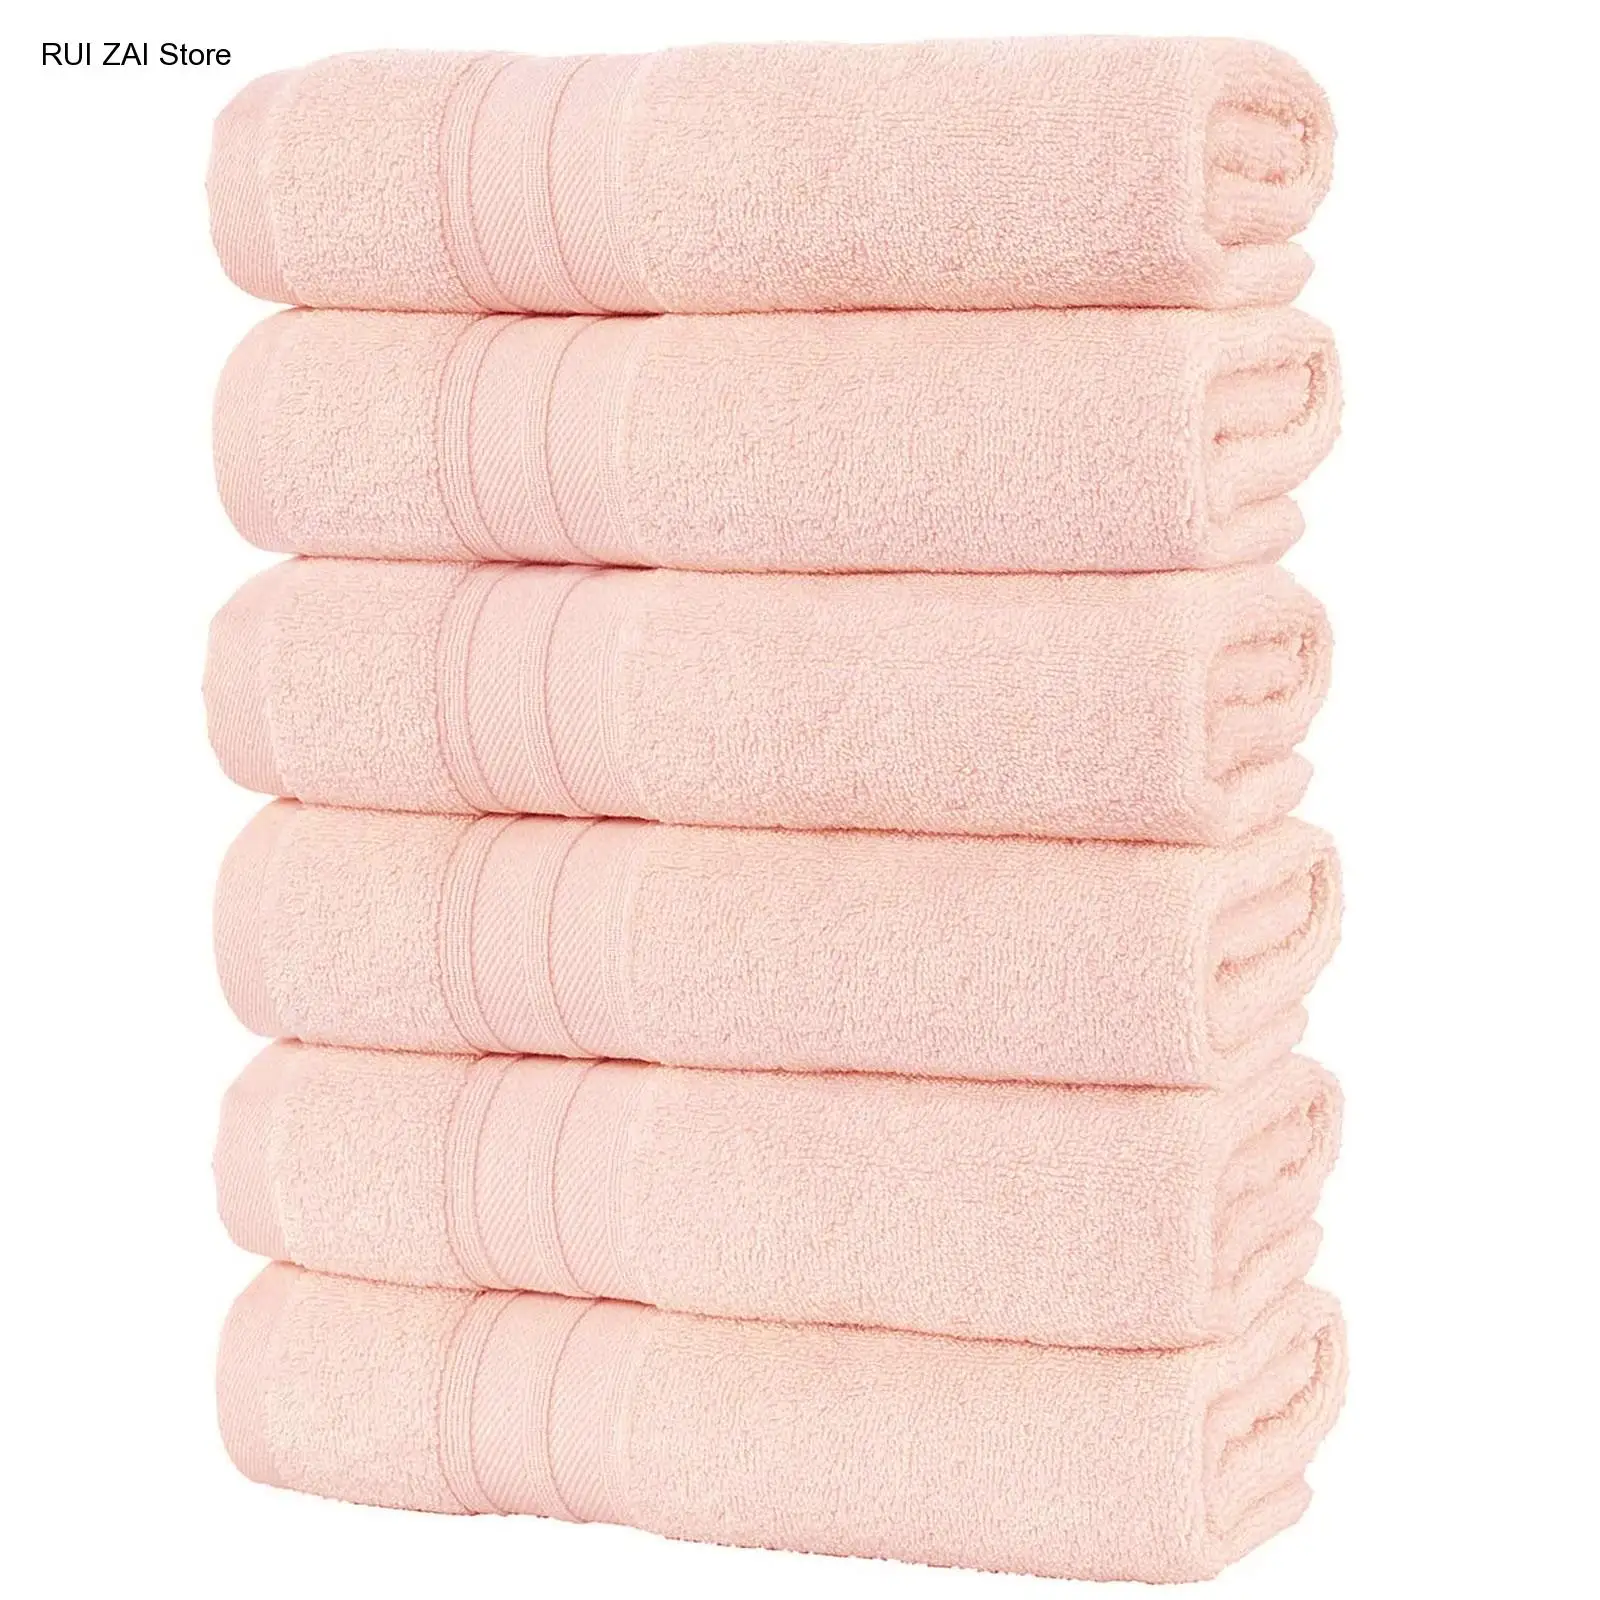 

6Ps Luxury Bath Towels Set Towels Beyond 100% Turkish Cotton Soft and Hotel Quality Ultra Soft Super Absorbent Bathroom